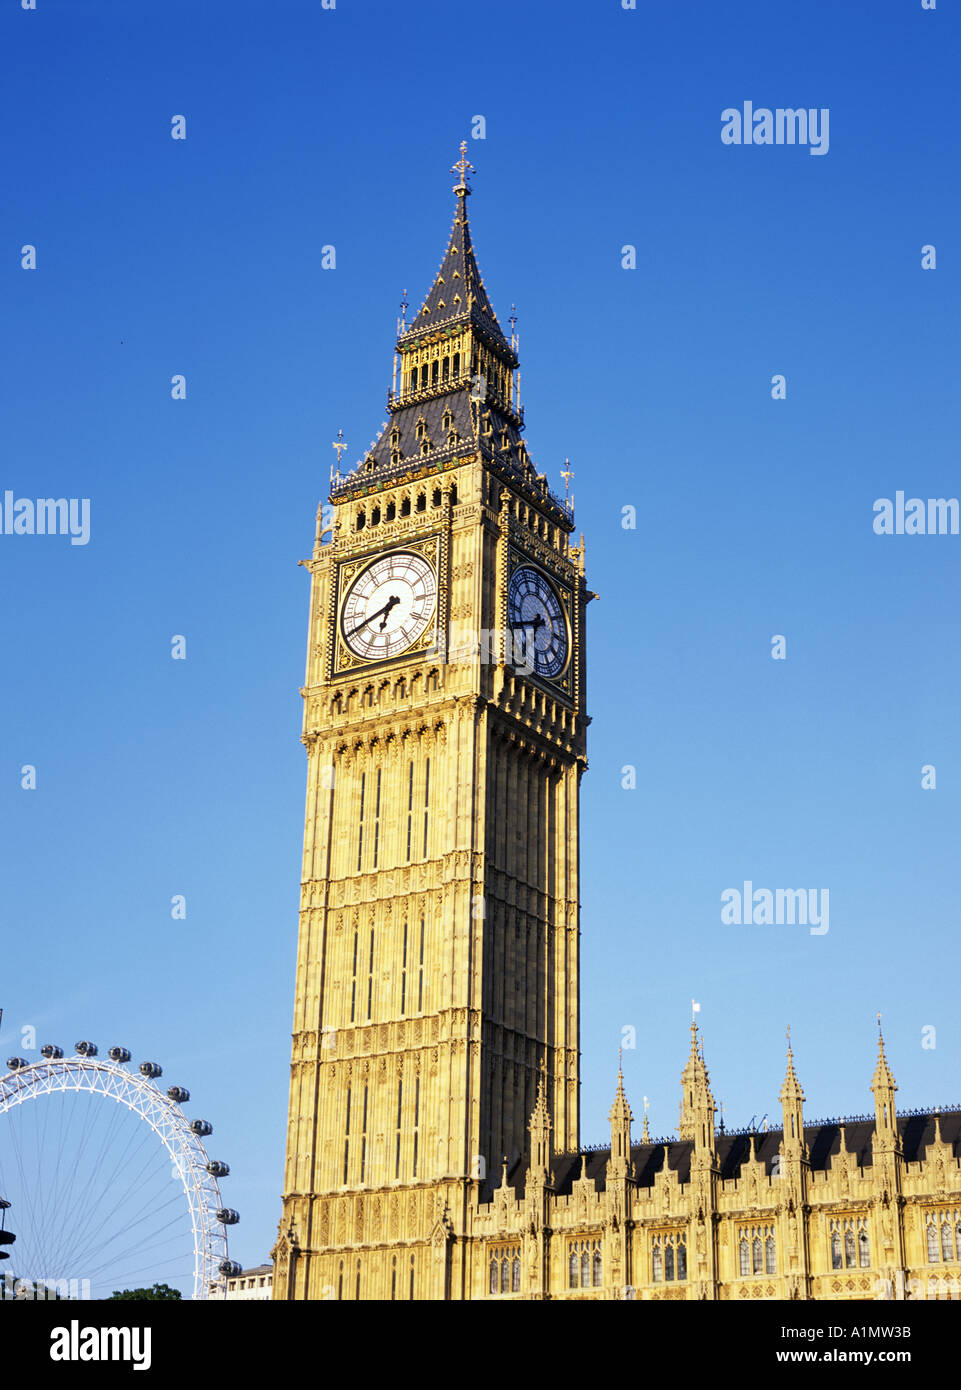 The Big Ben clock tower at the Westminster Houses of Parliament in London England Stock Photo